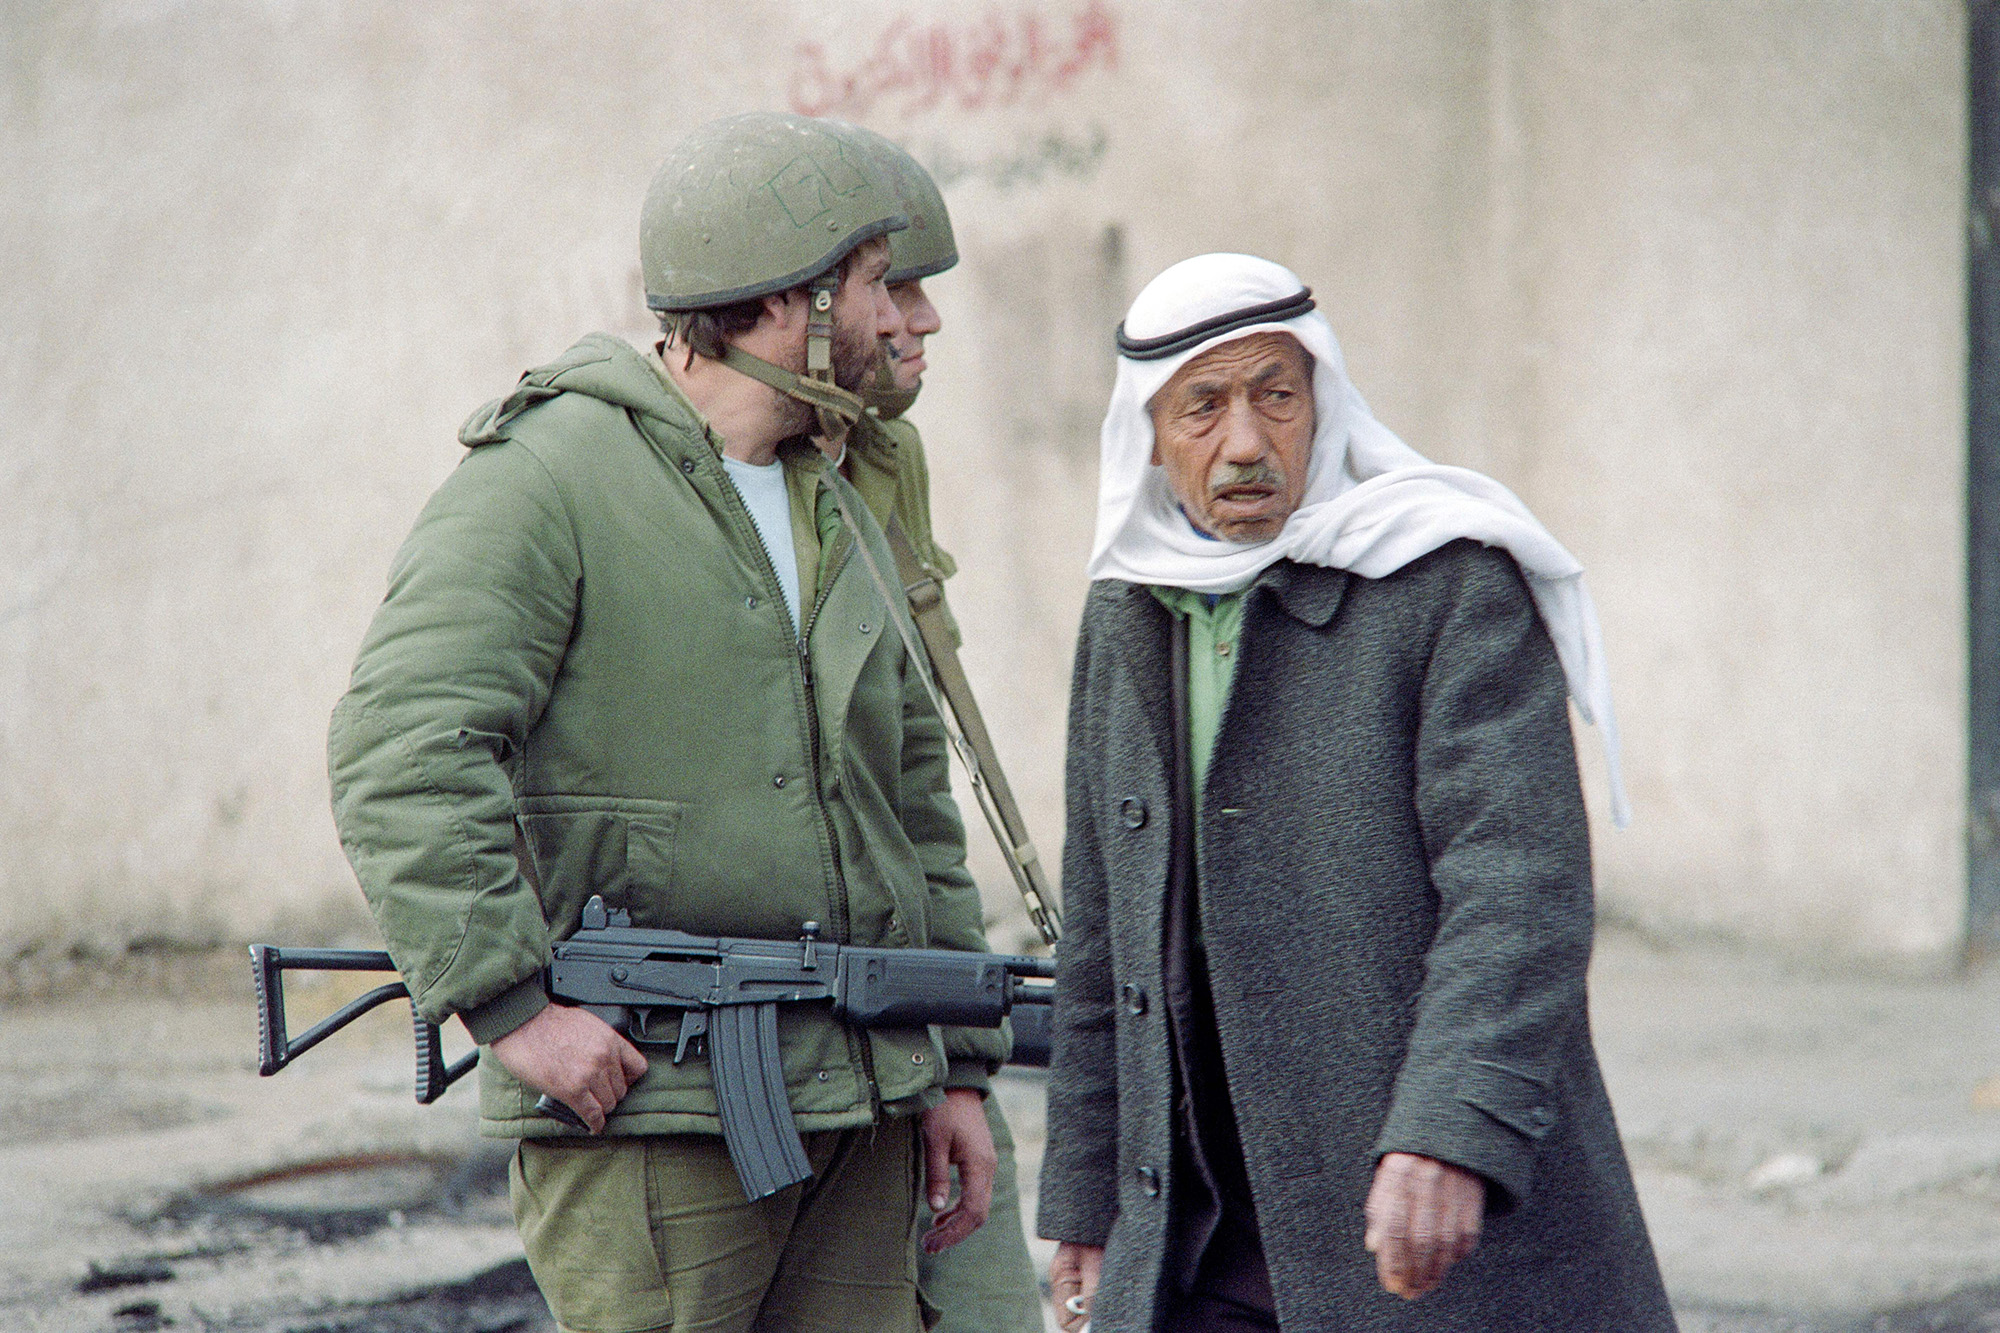 A Palestinian man passes Israeli soldiers patrolling in a street of Gaza on December 20, 1987.